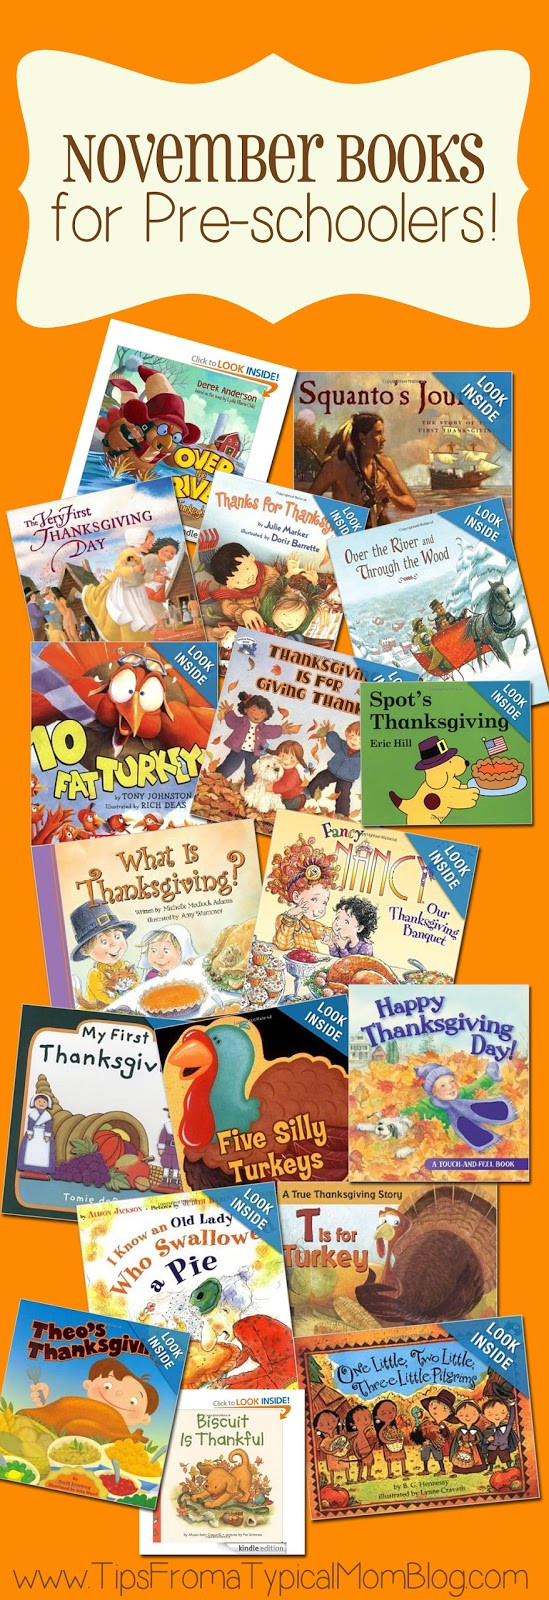 A Turkey For Thanksgiving Book
 Thanksgiving Book List for Preschoolers